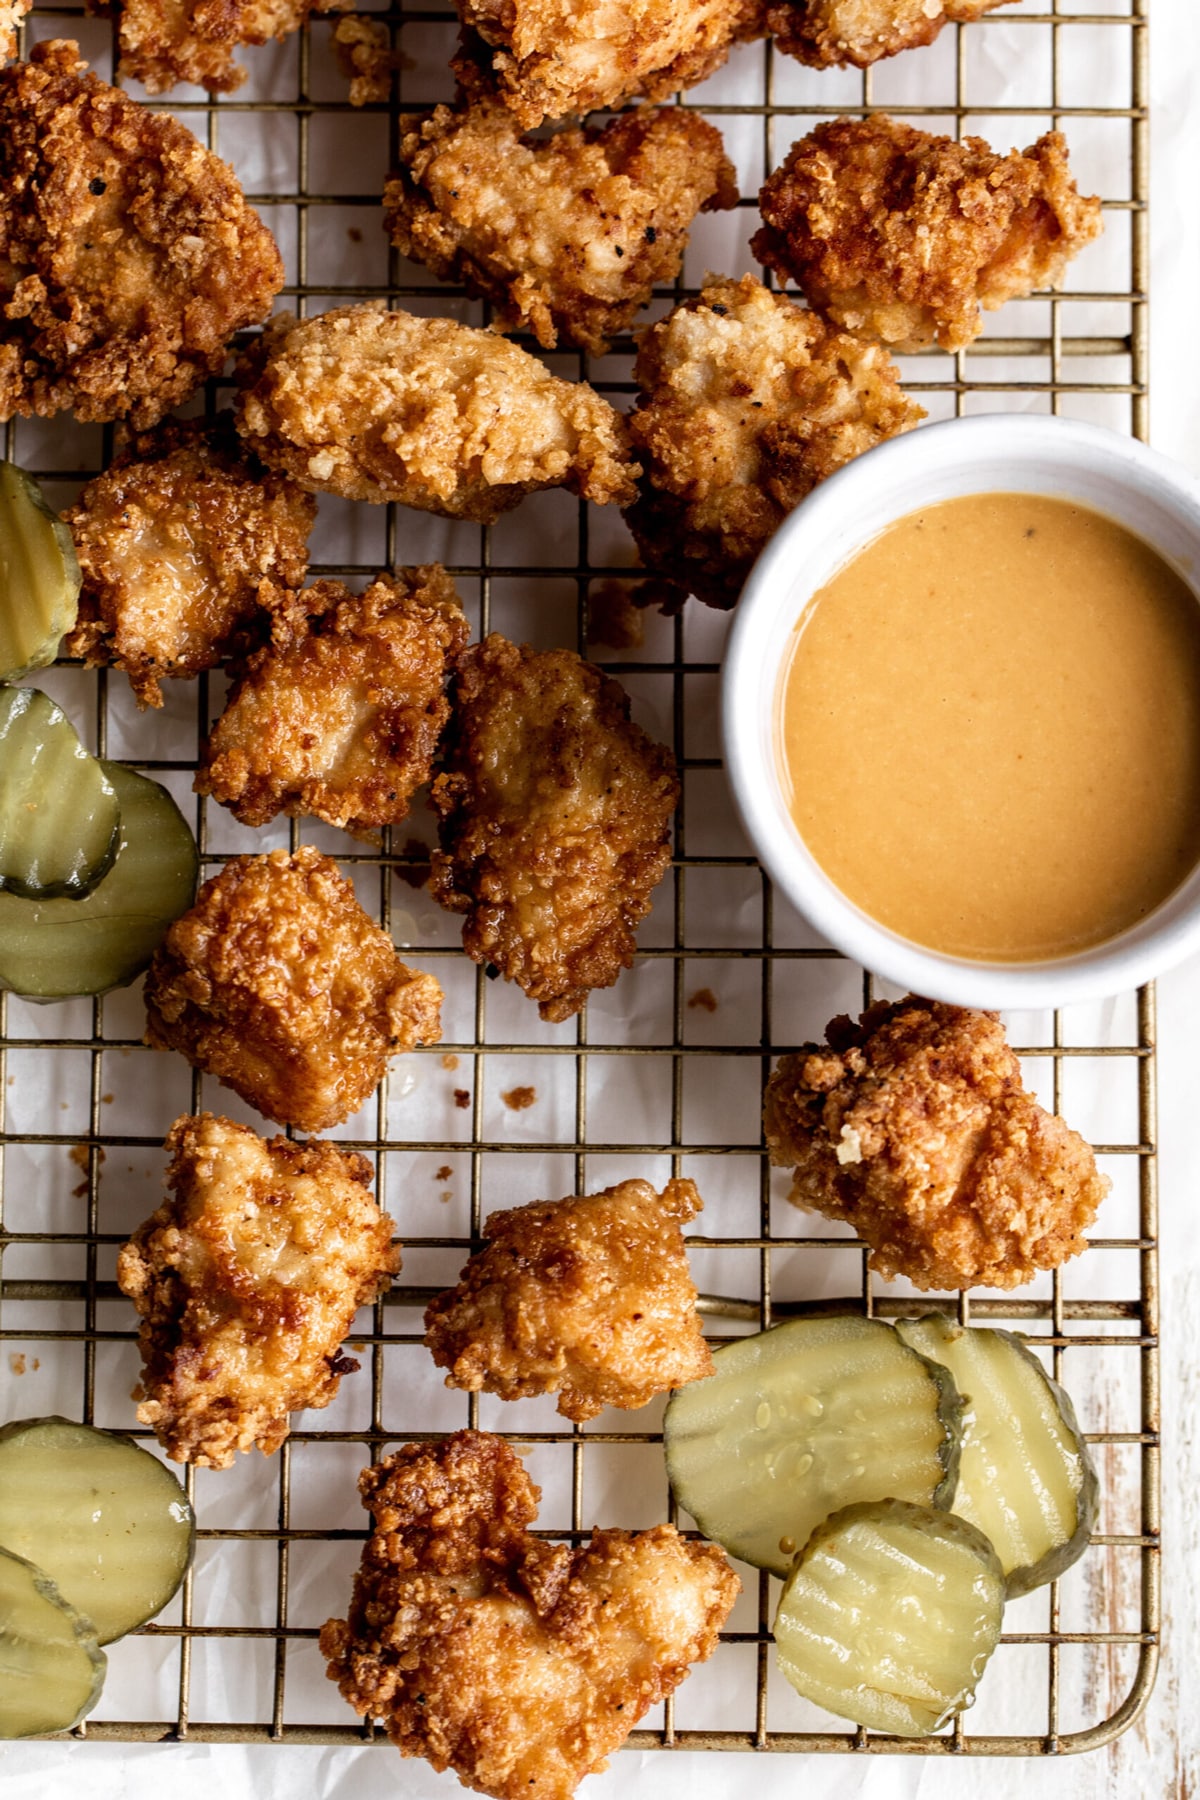 Crispy chicken nuggets with tangy dipping sauce